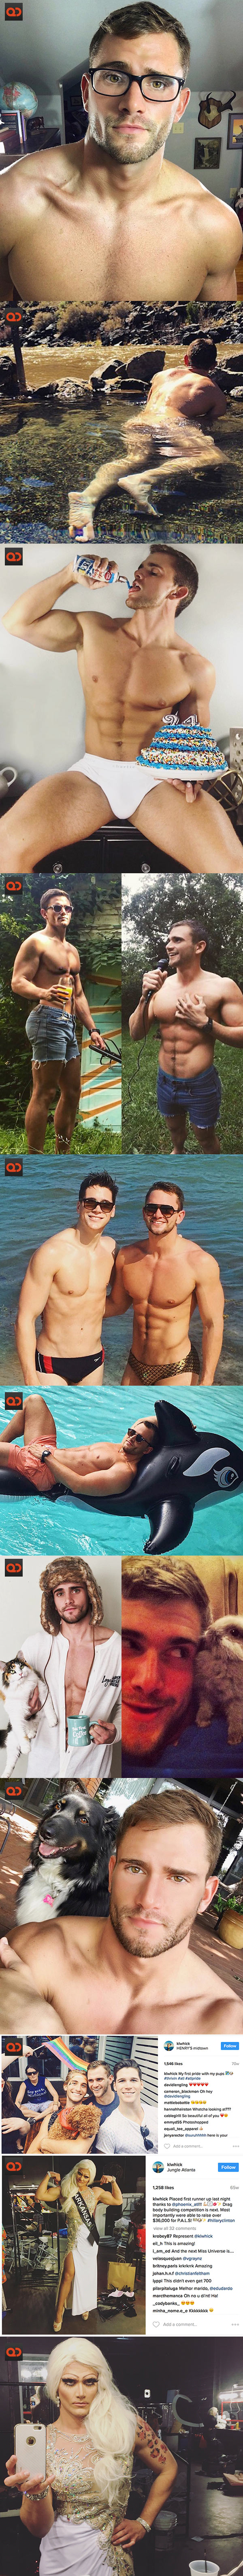 QC Crush: Meet Keegan Whicker - This Engineer And IG Model Arrived Just In Time For Valentine's Day!